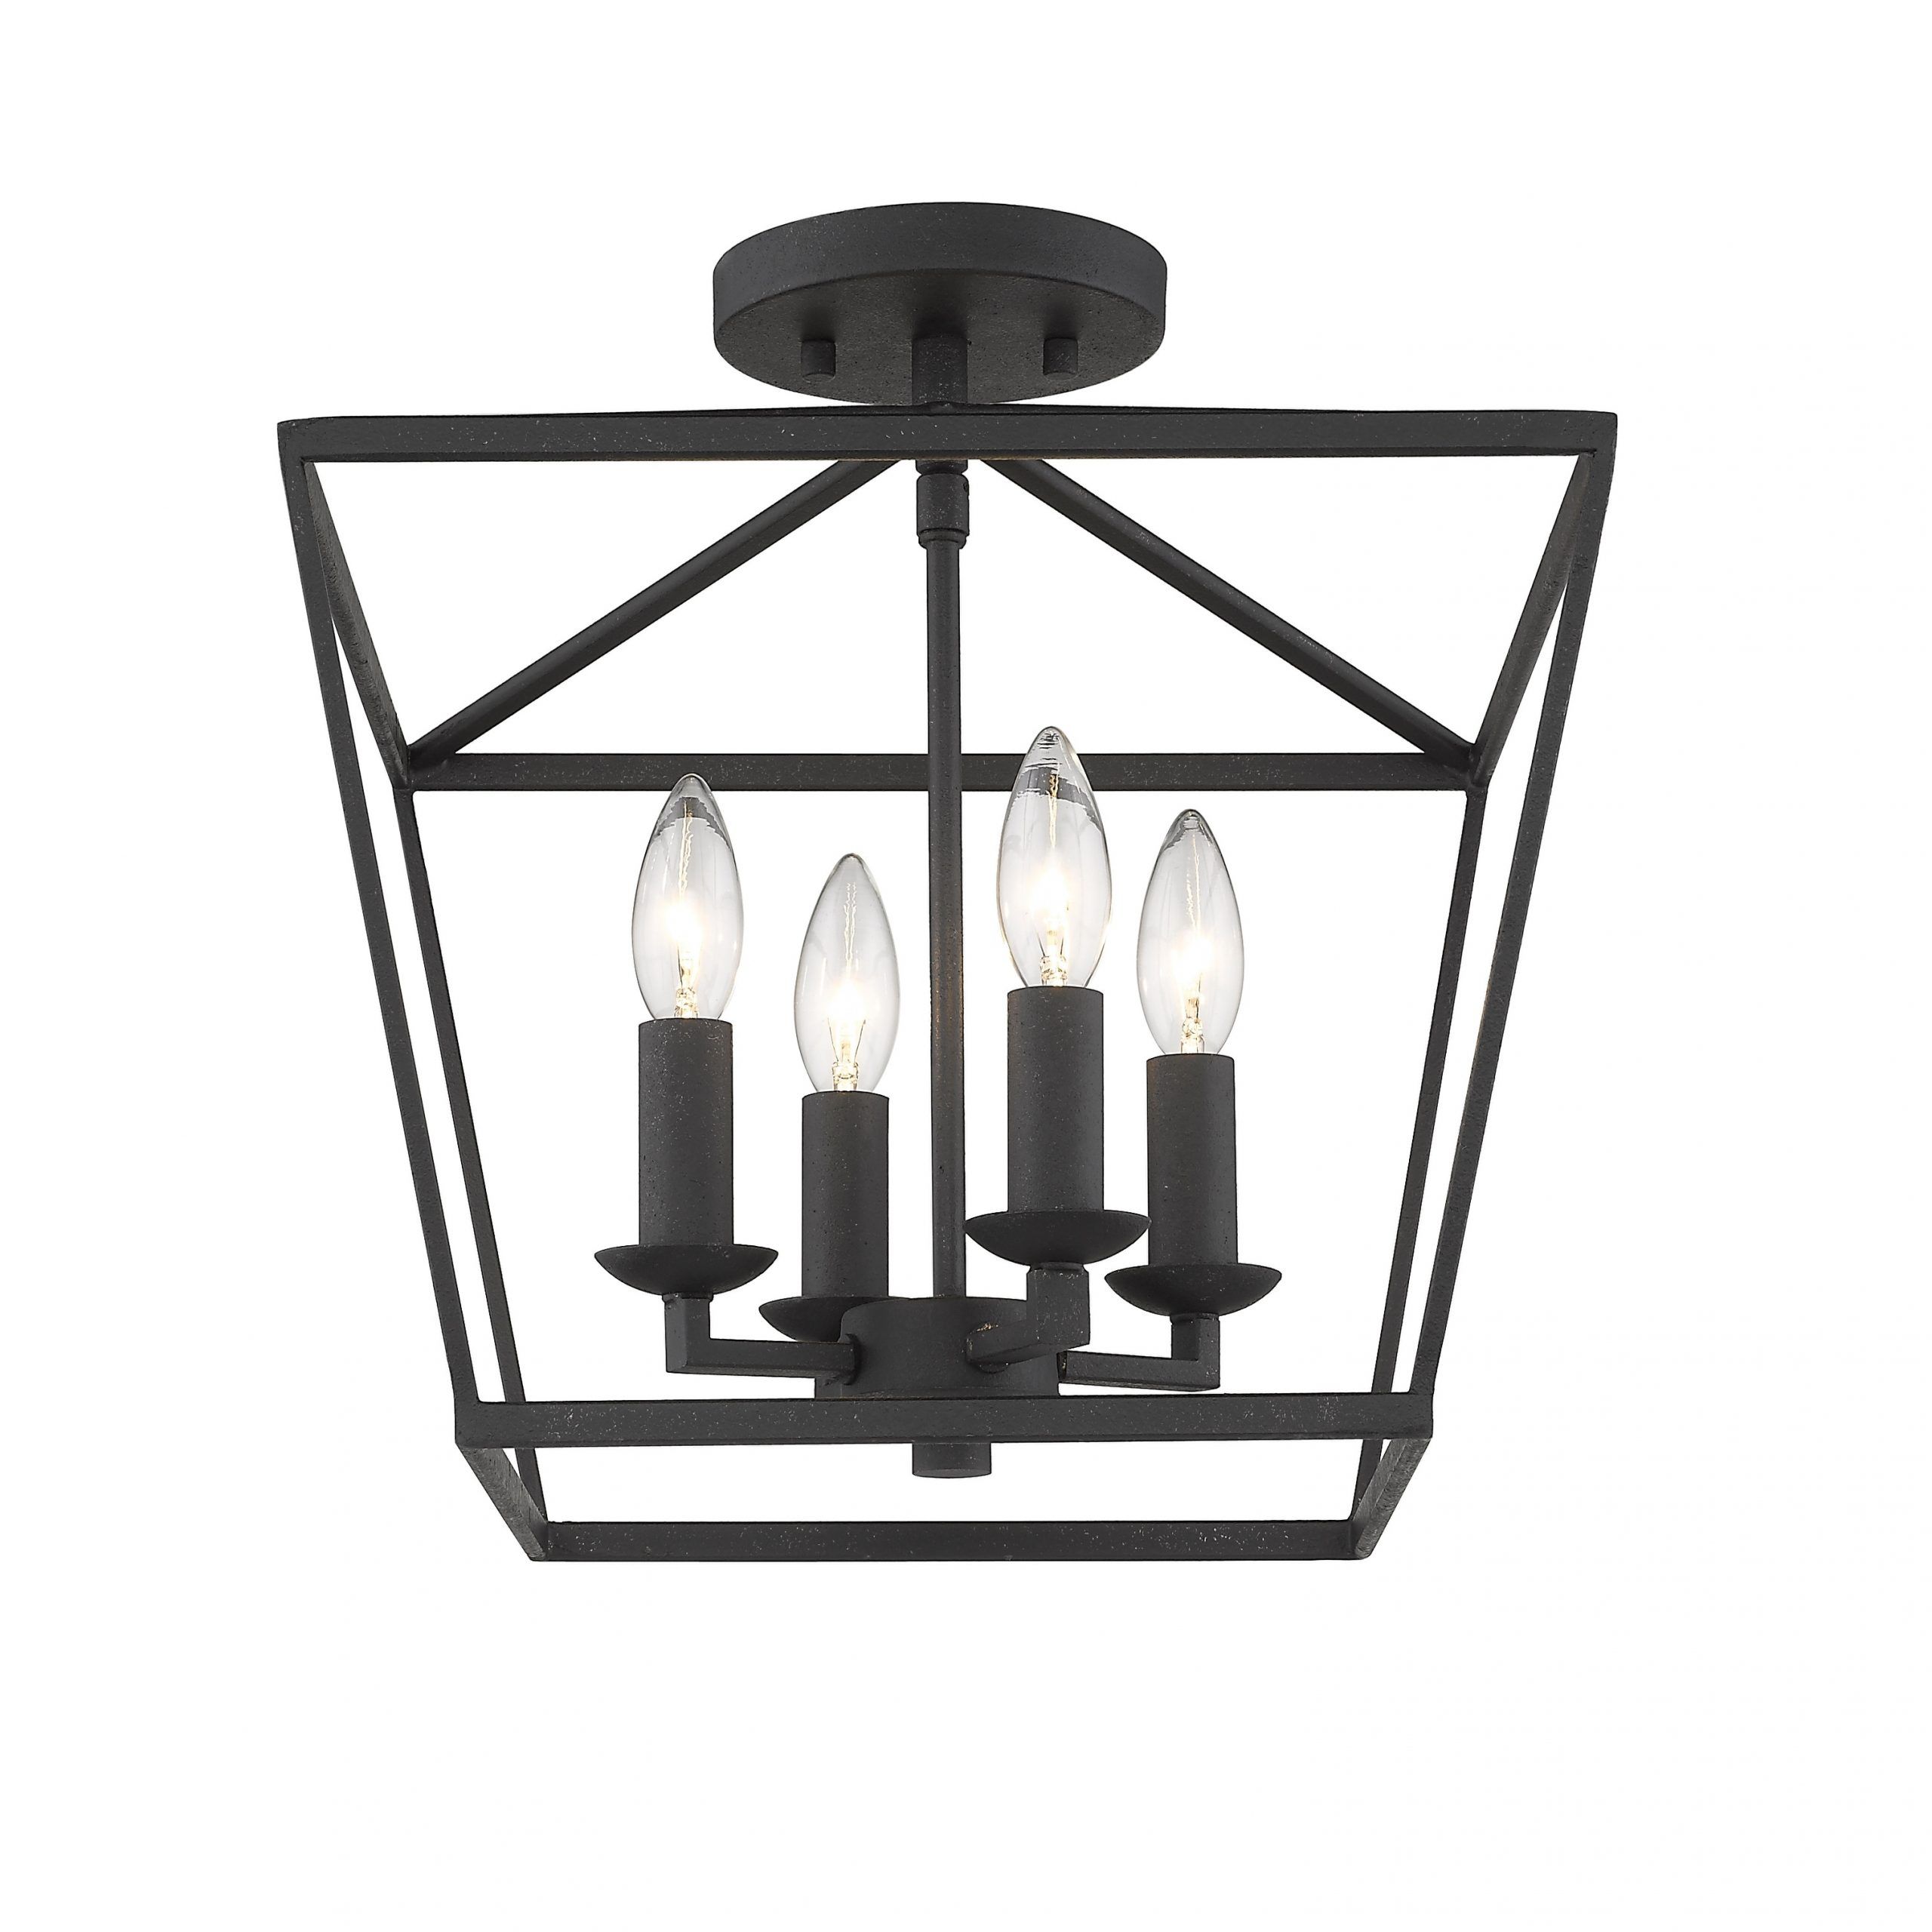 Mini Lantern Chandeliers With Regard To Recent Mini Lantern Ceiling Light And Pendant In Black – Overstock –  (View 12 of 15)